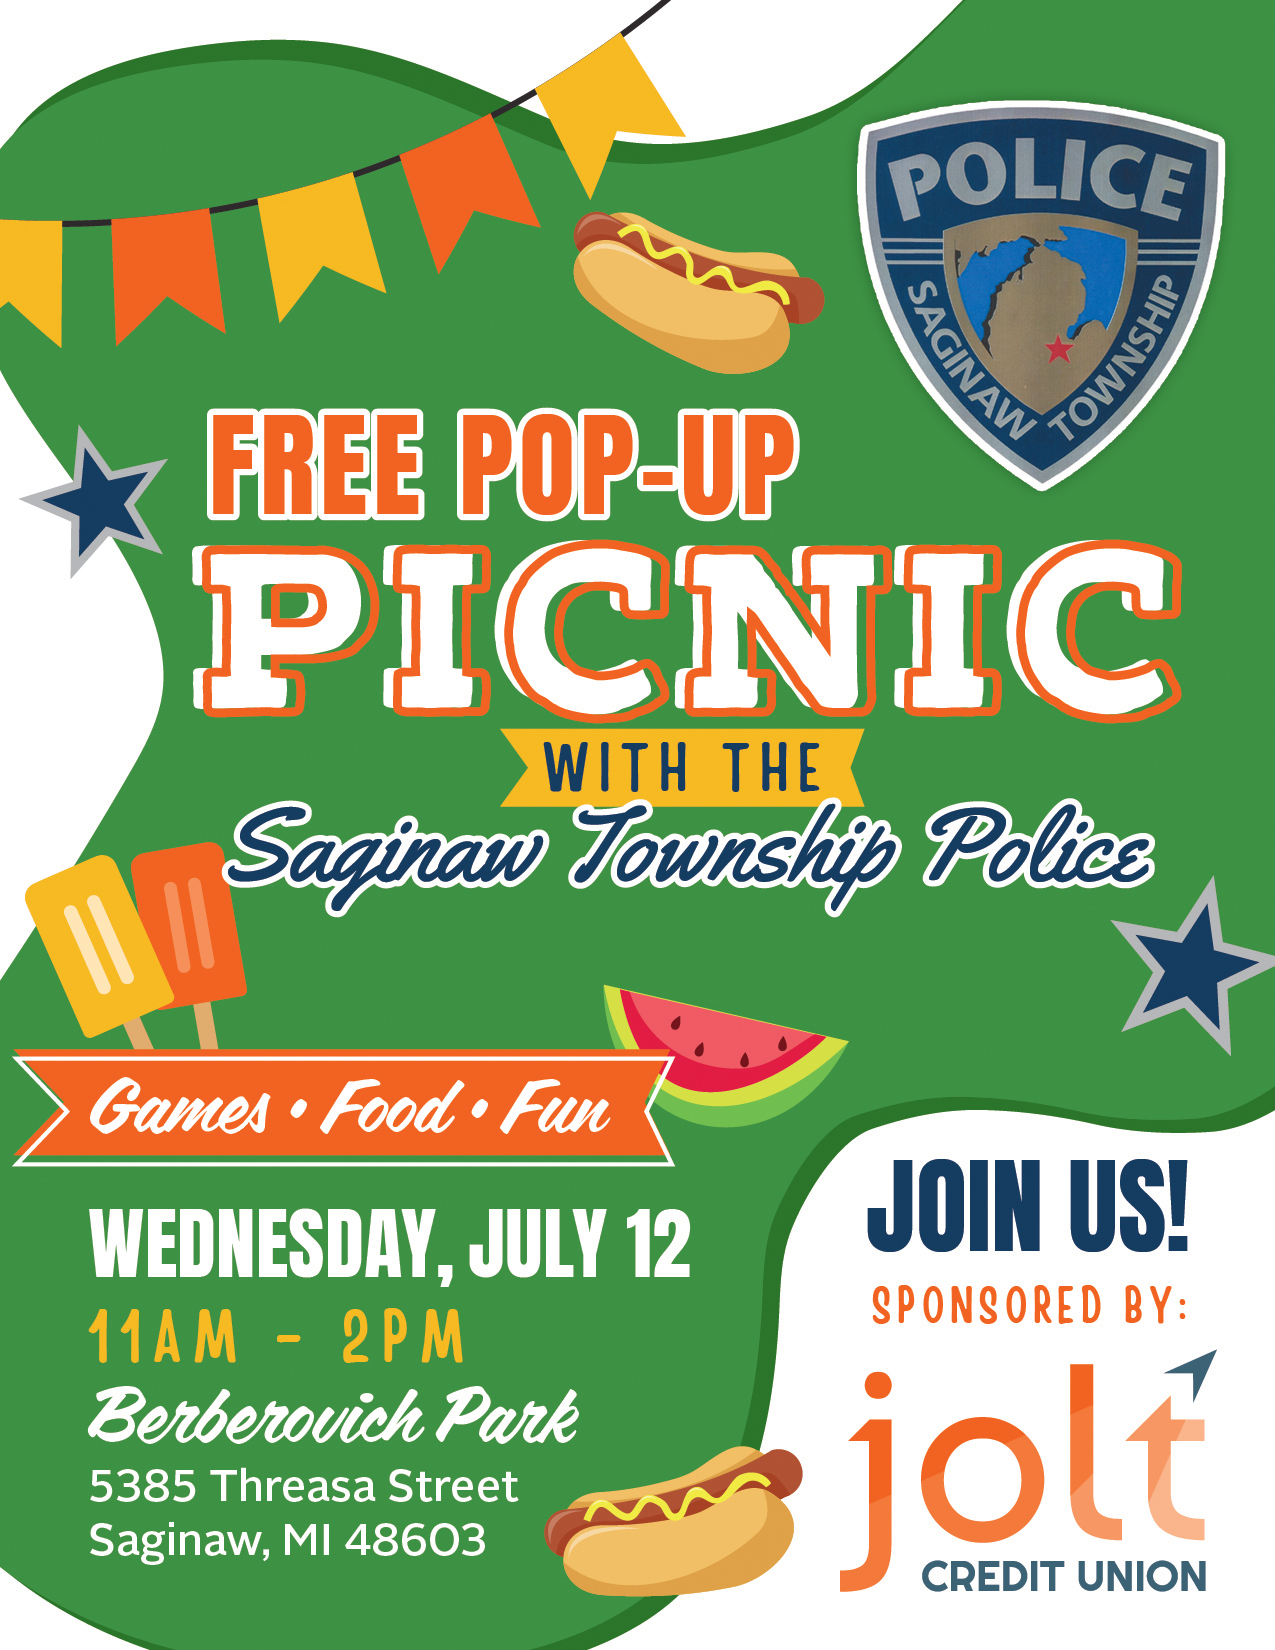 Pop-Up Picnic with Police